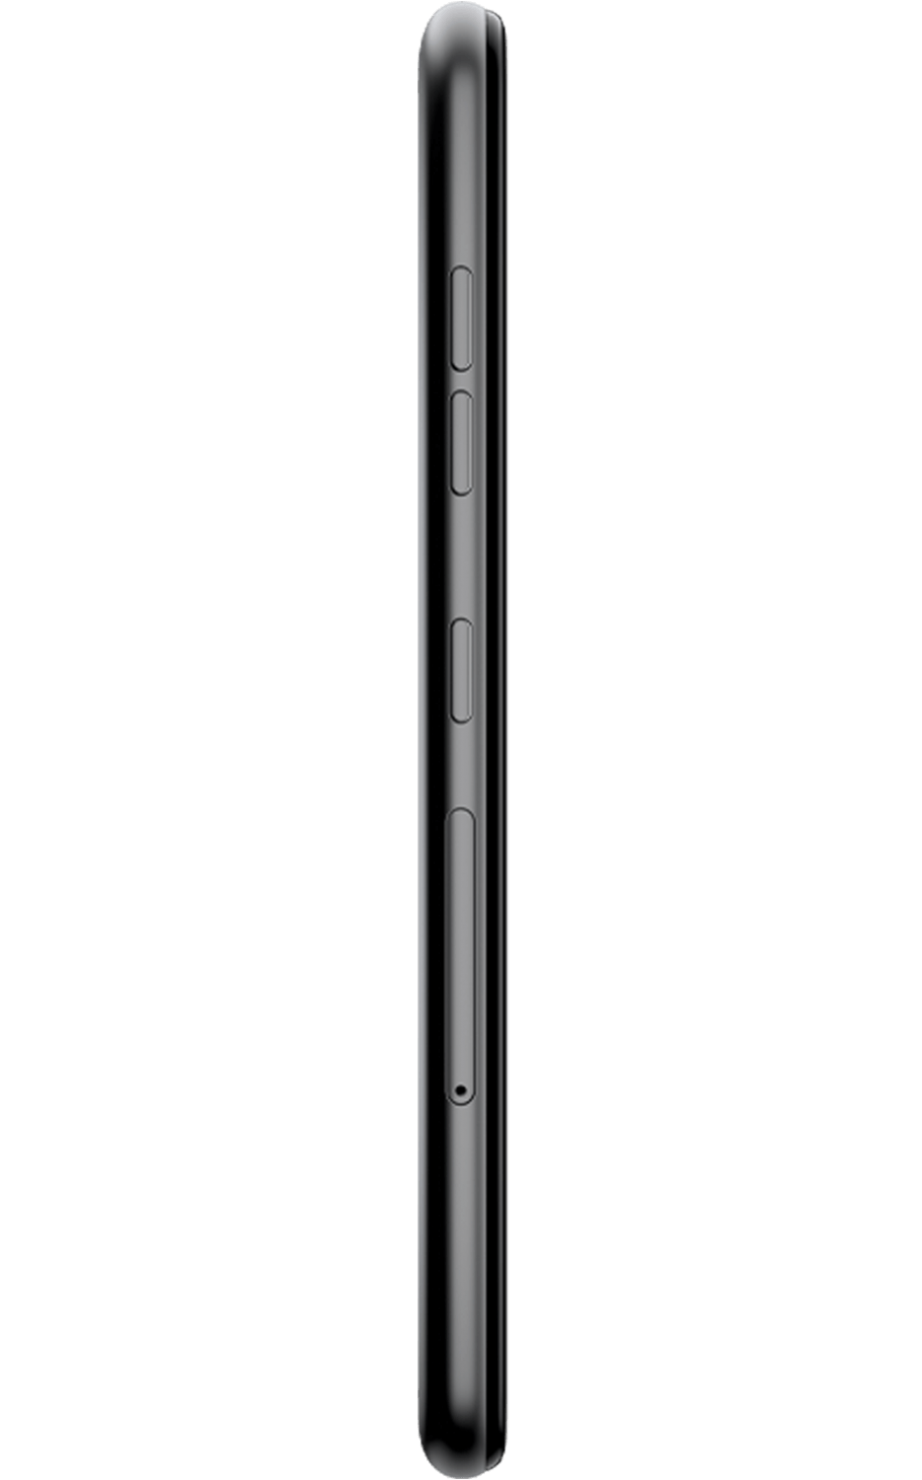 LG-Aristo-5-Silver-rightimage.png